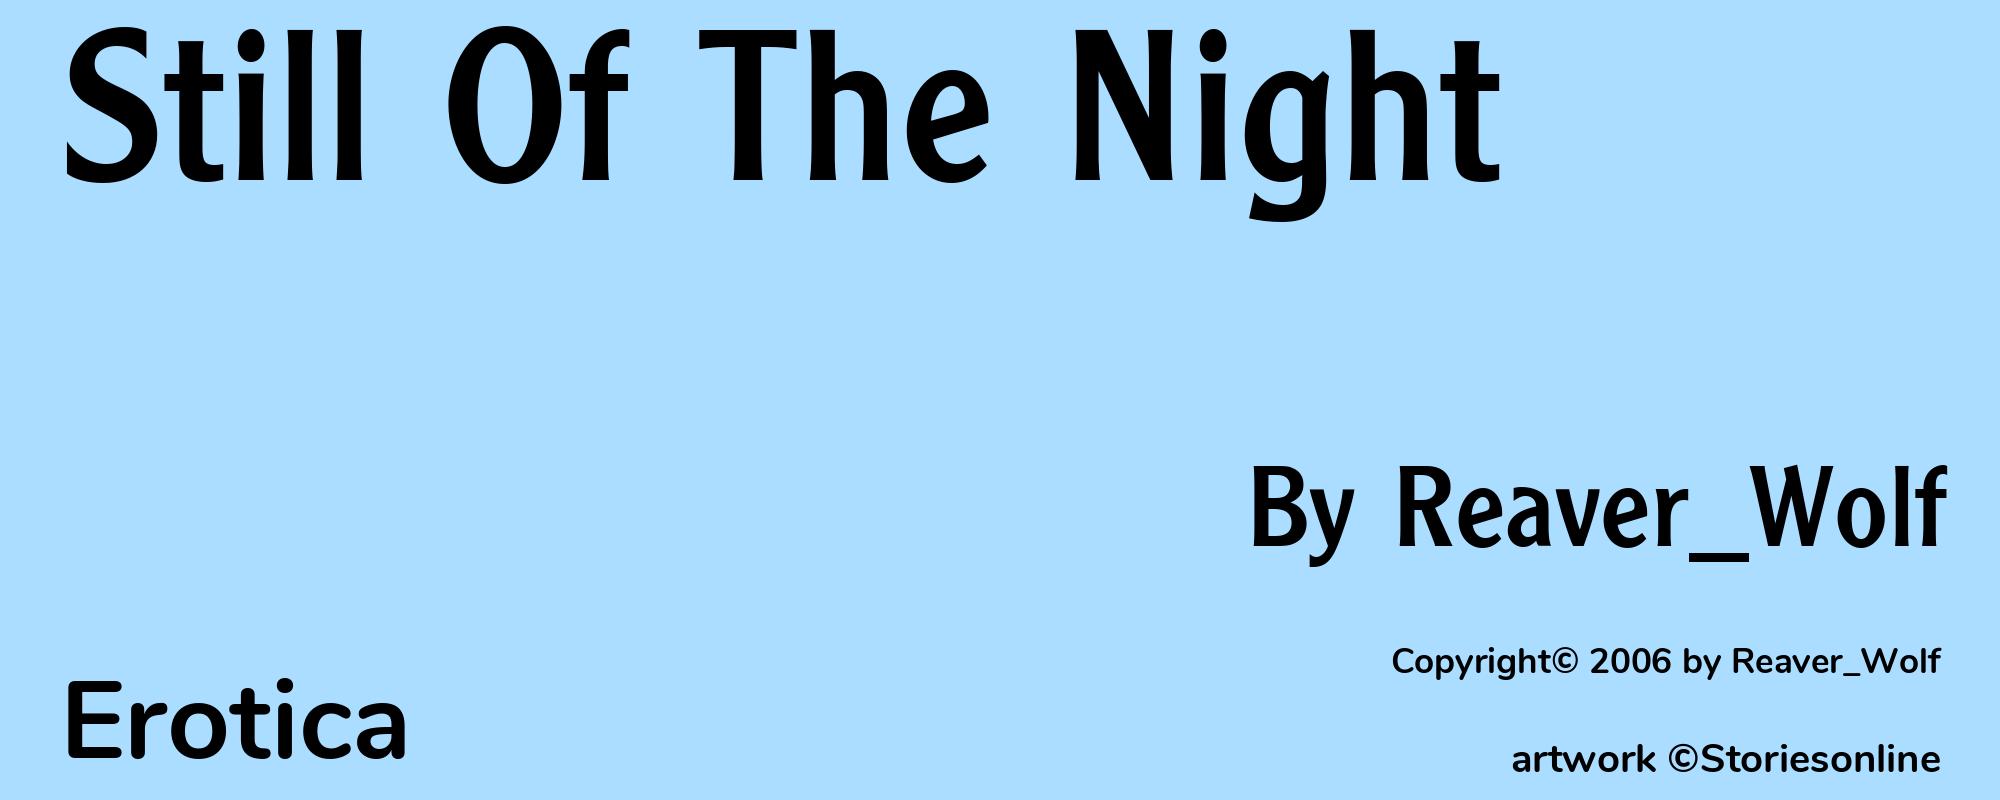 Still Of The Night - Cover